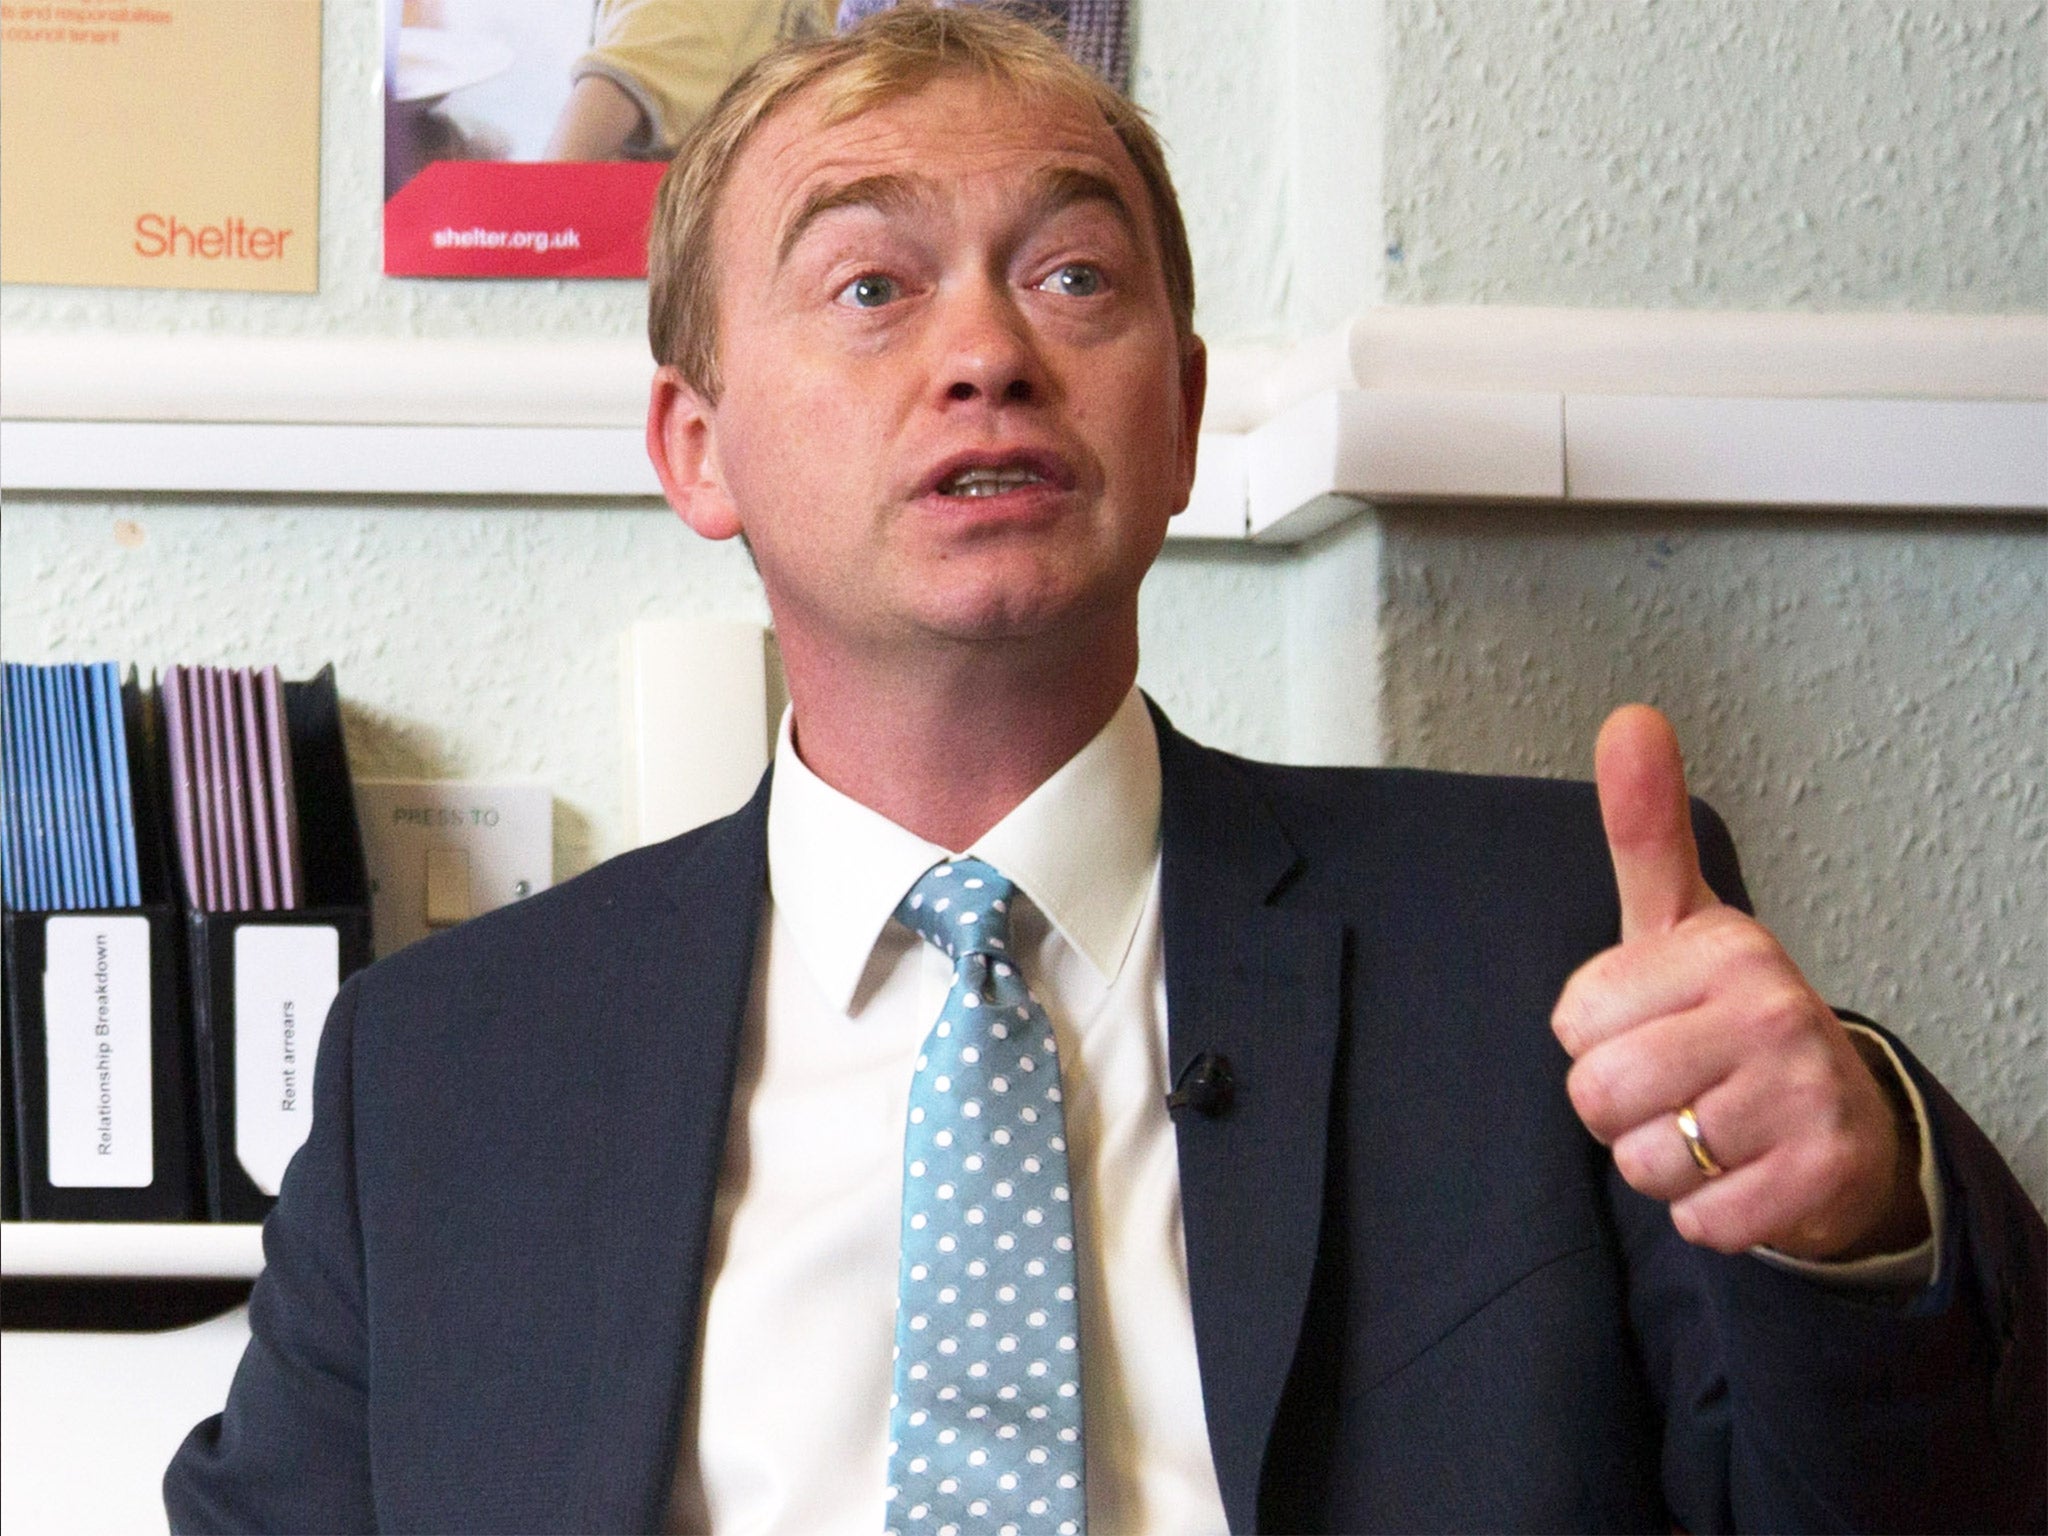 Tim Farron visited the Bournemouth offices of housing charity Shelter on Tuesday